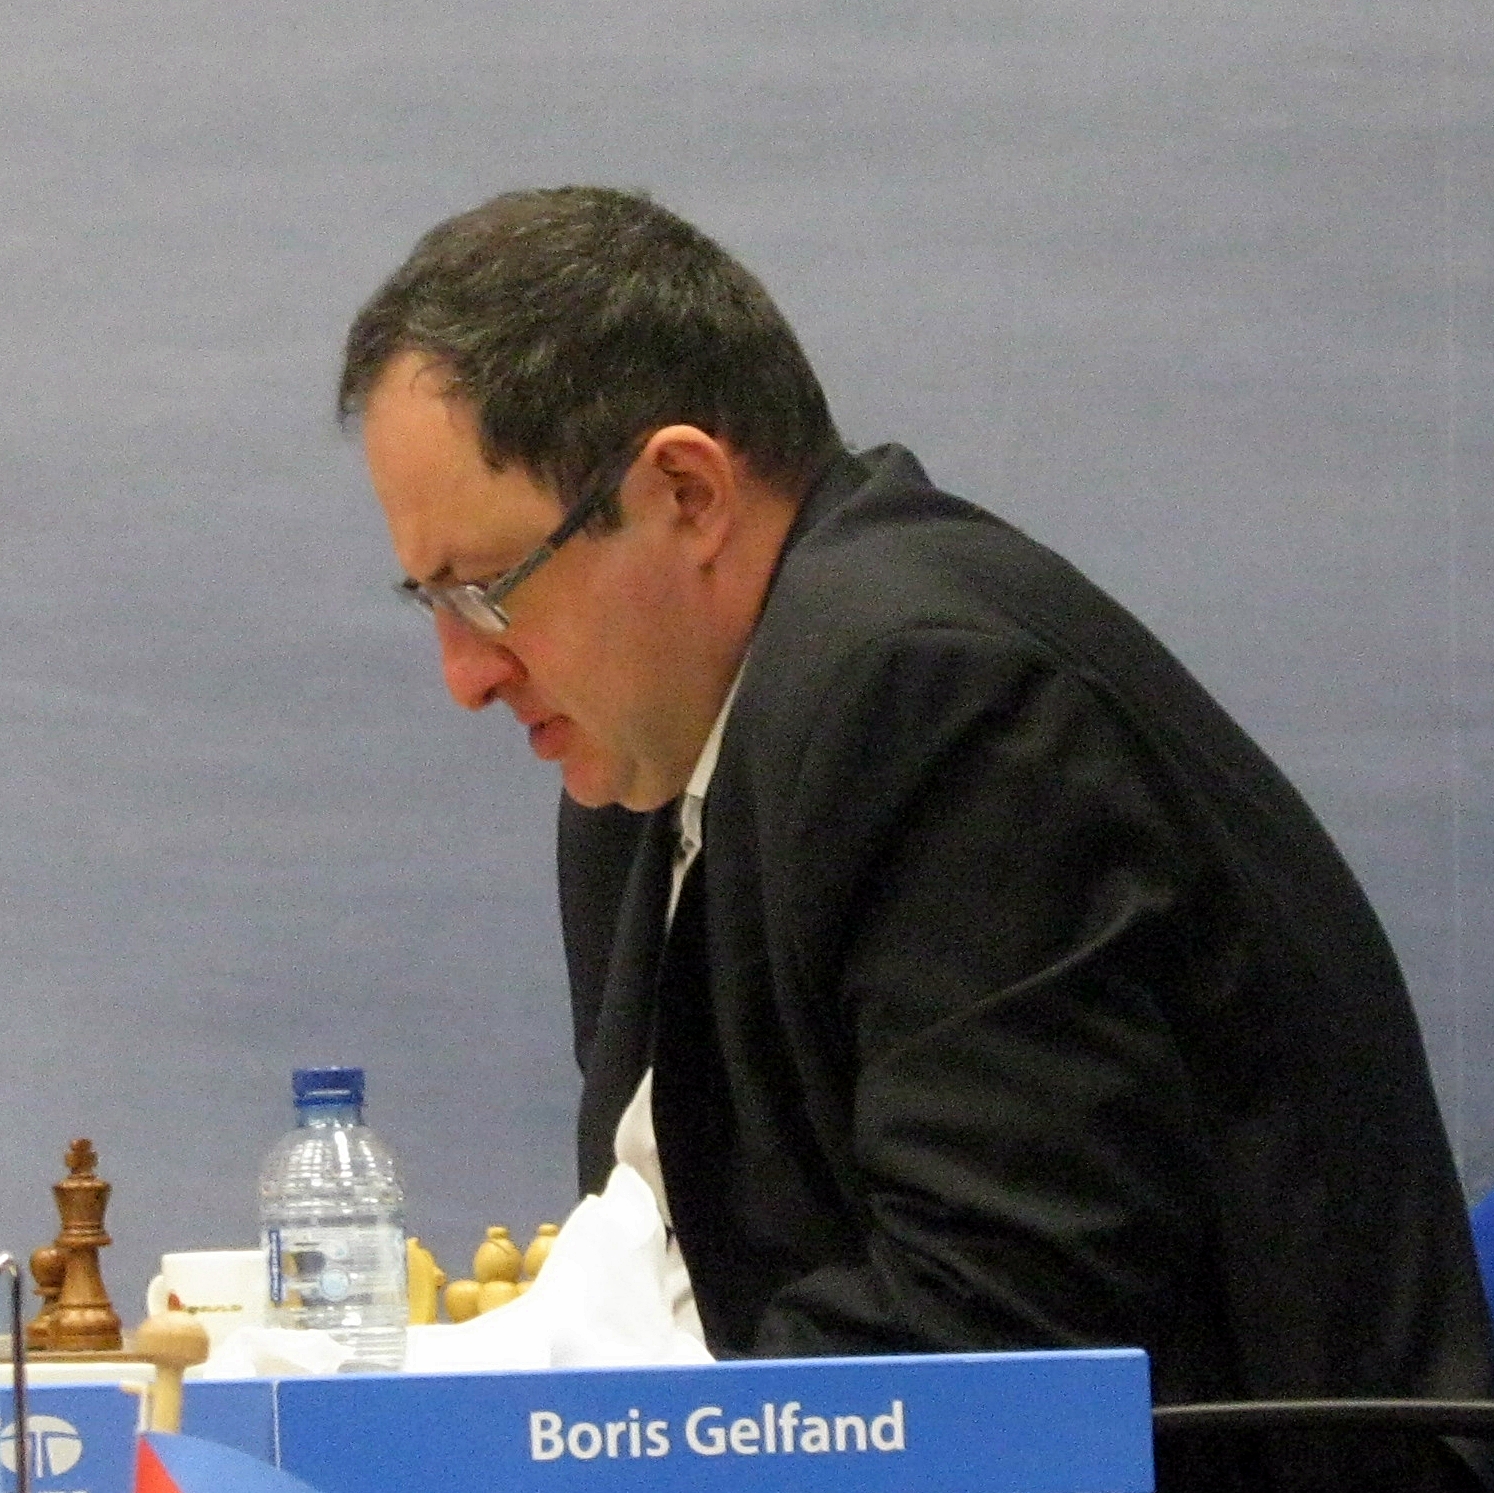 Anand – Gelfand game 3 LIVE! – Chessdom